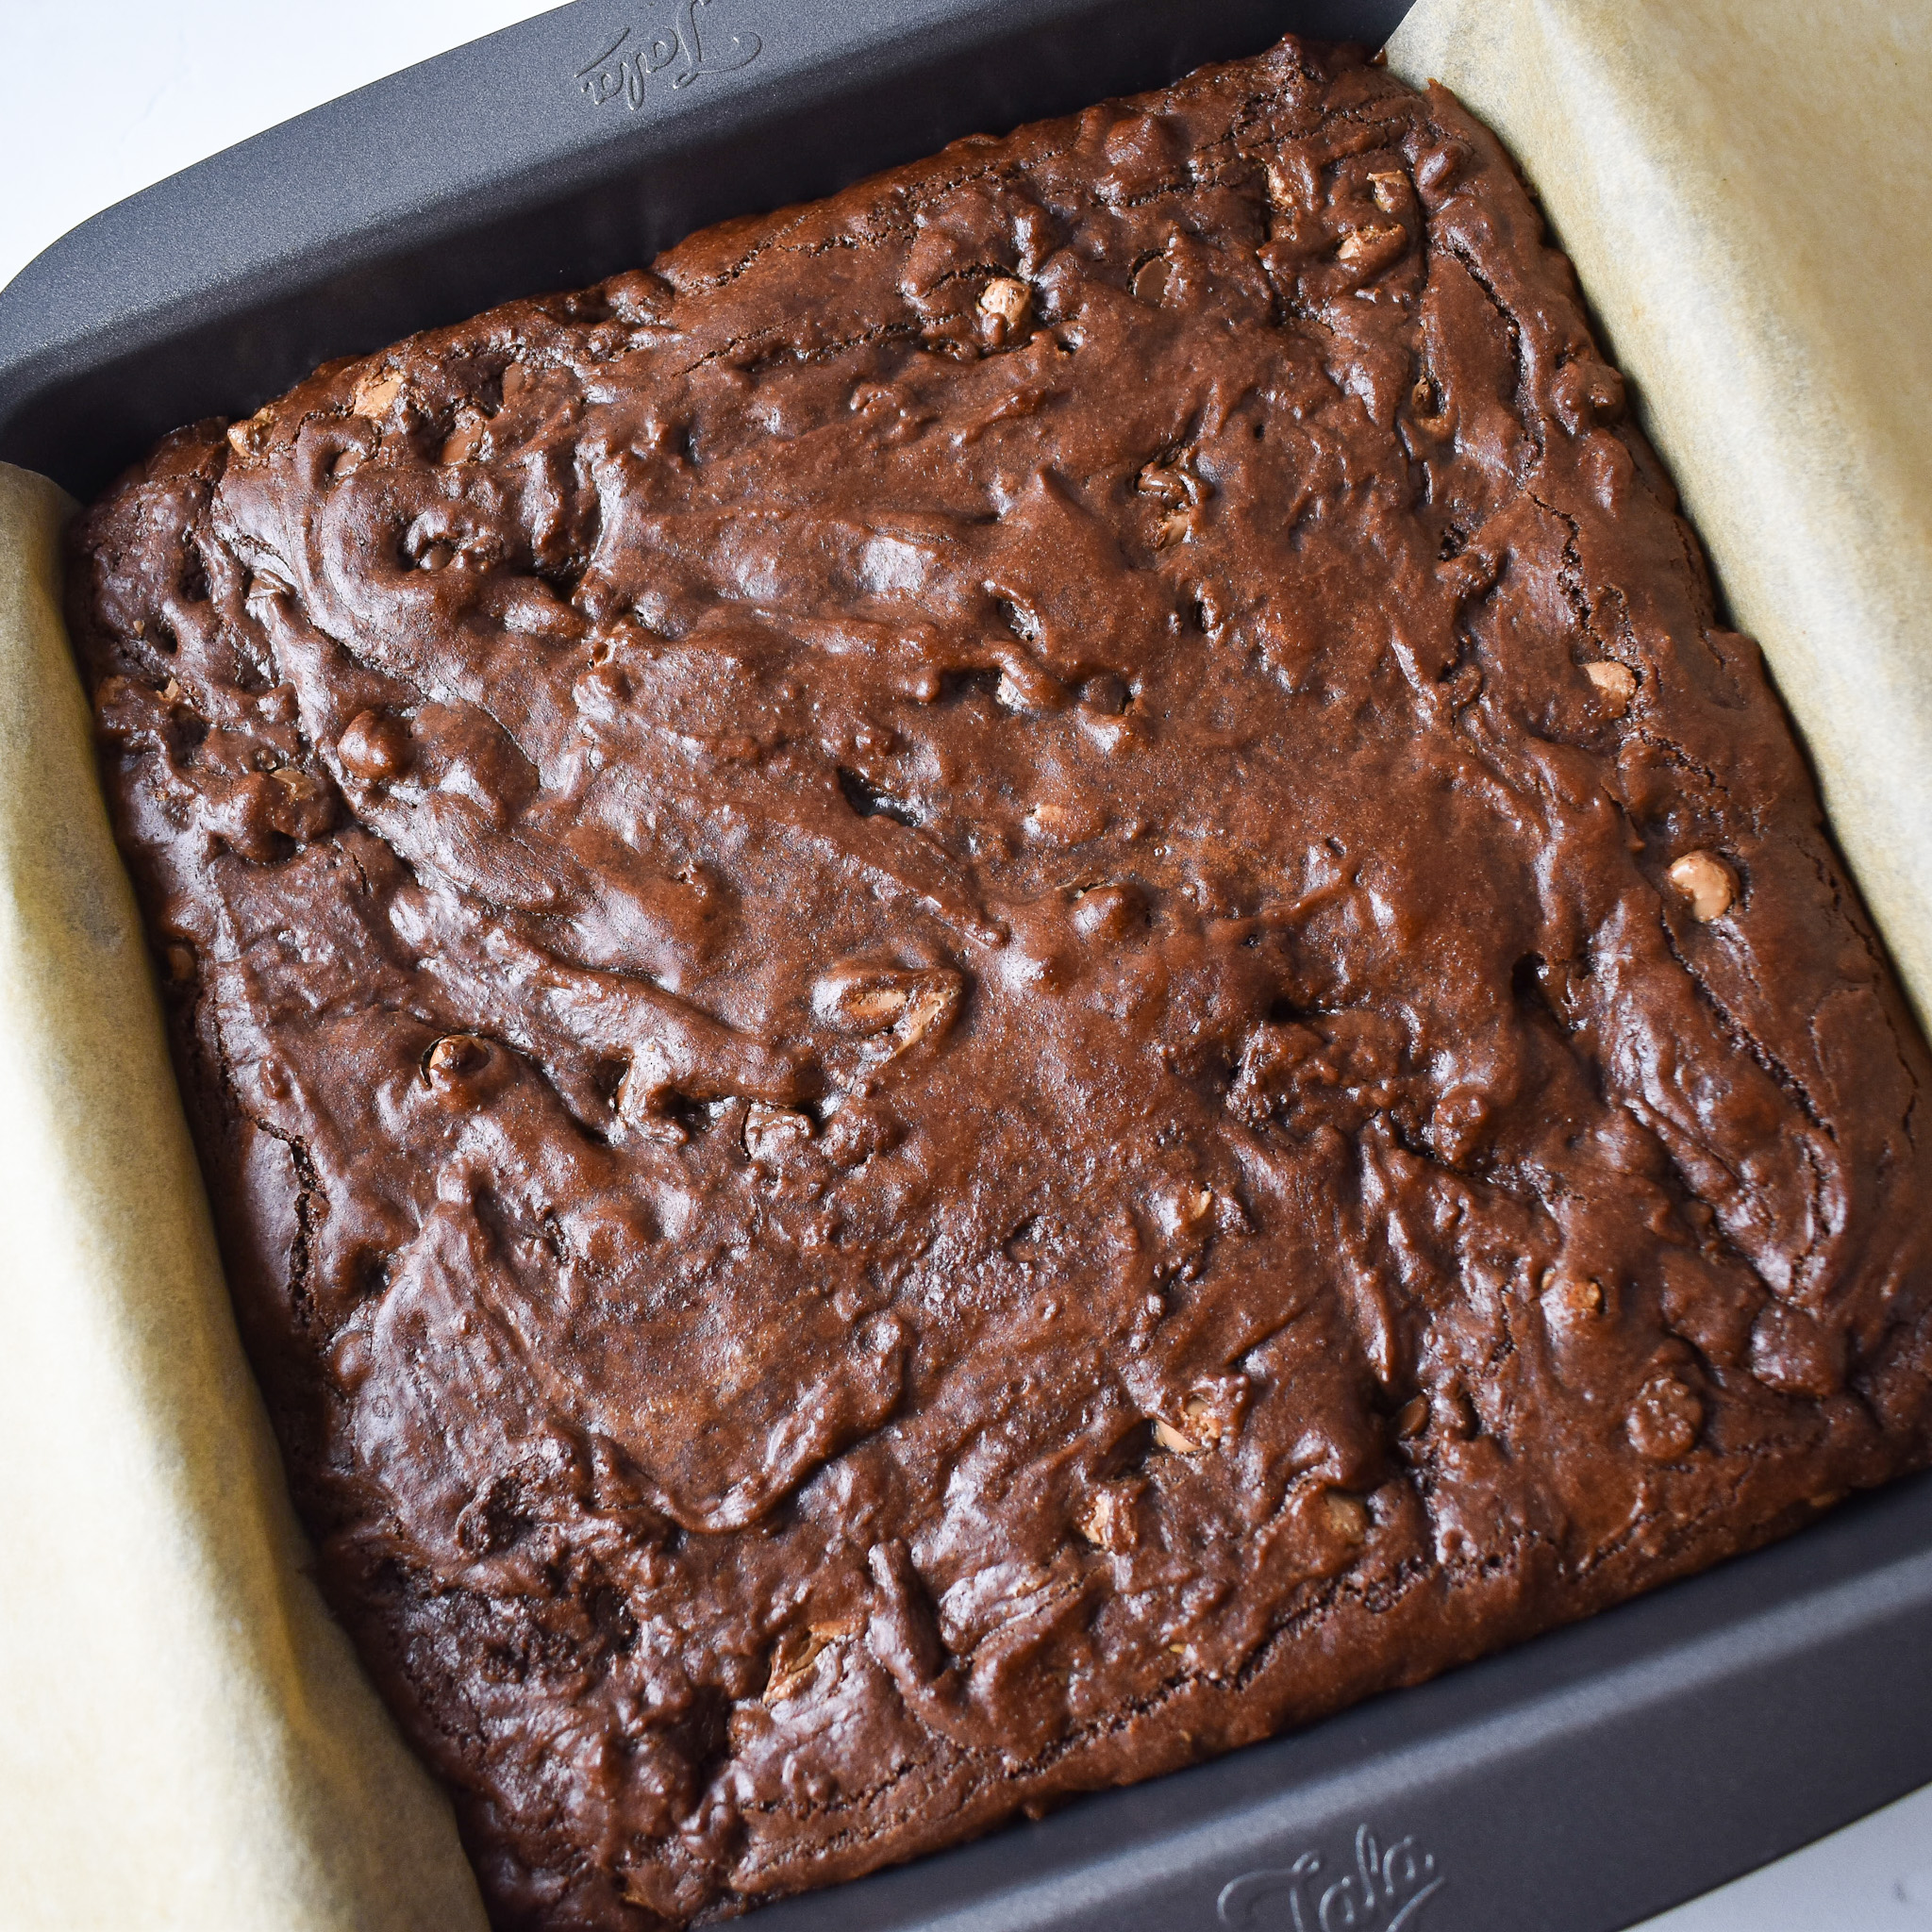 Whole uncut baked brownie in baking tin.